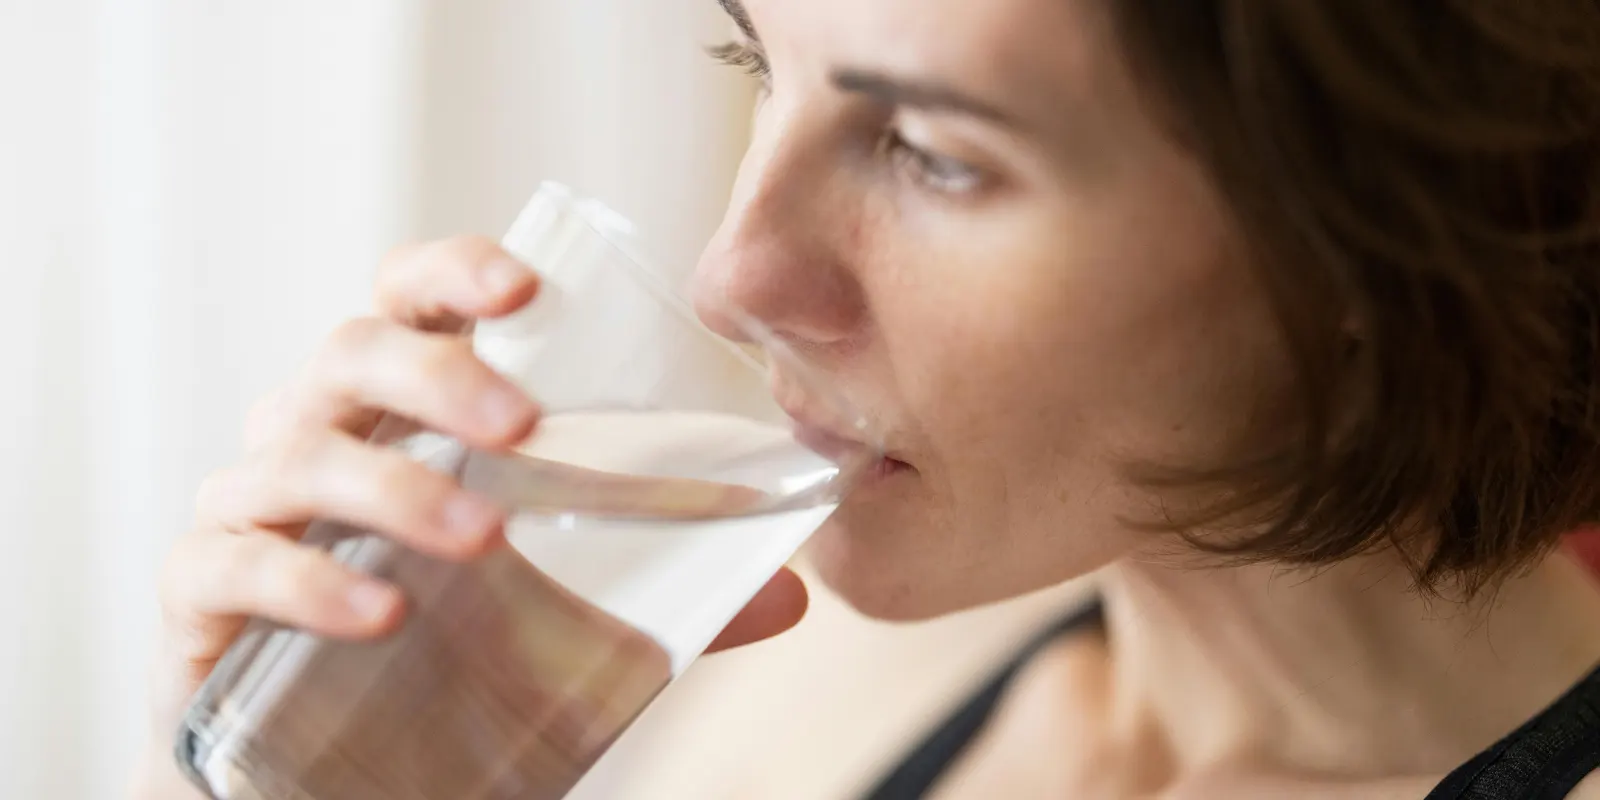 Woman enjoys a glass of water treated by a water softener, preventing limescale without removing natural minerals